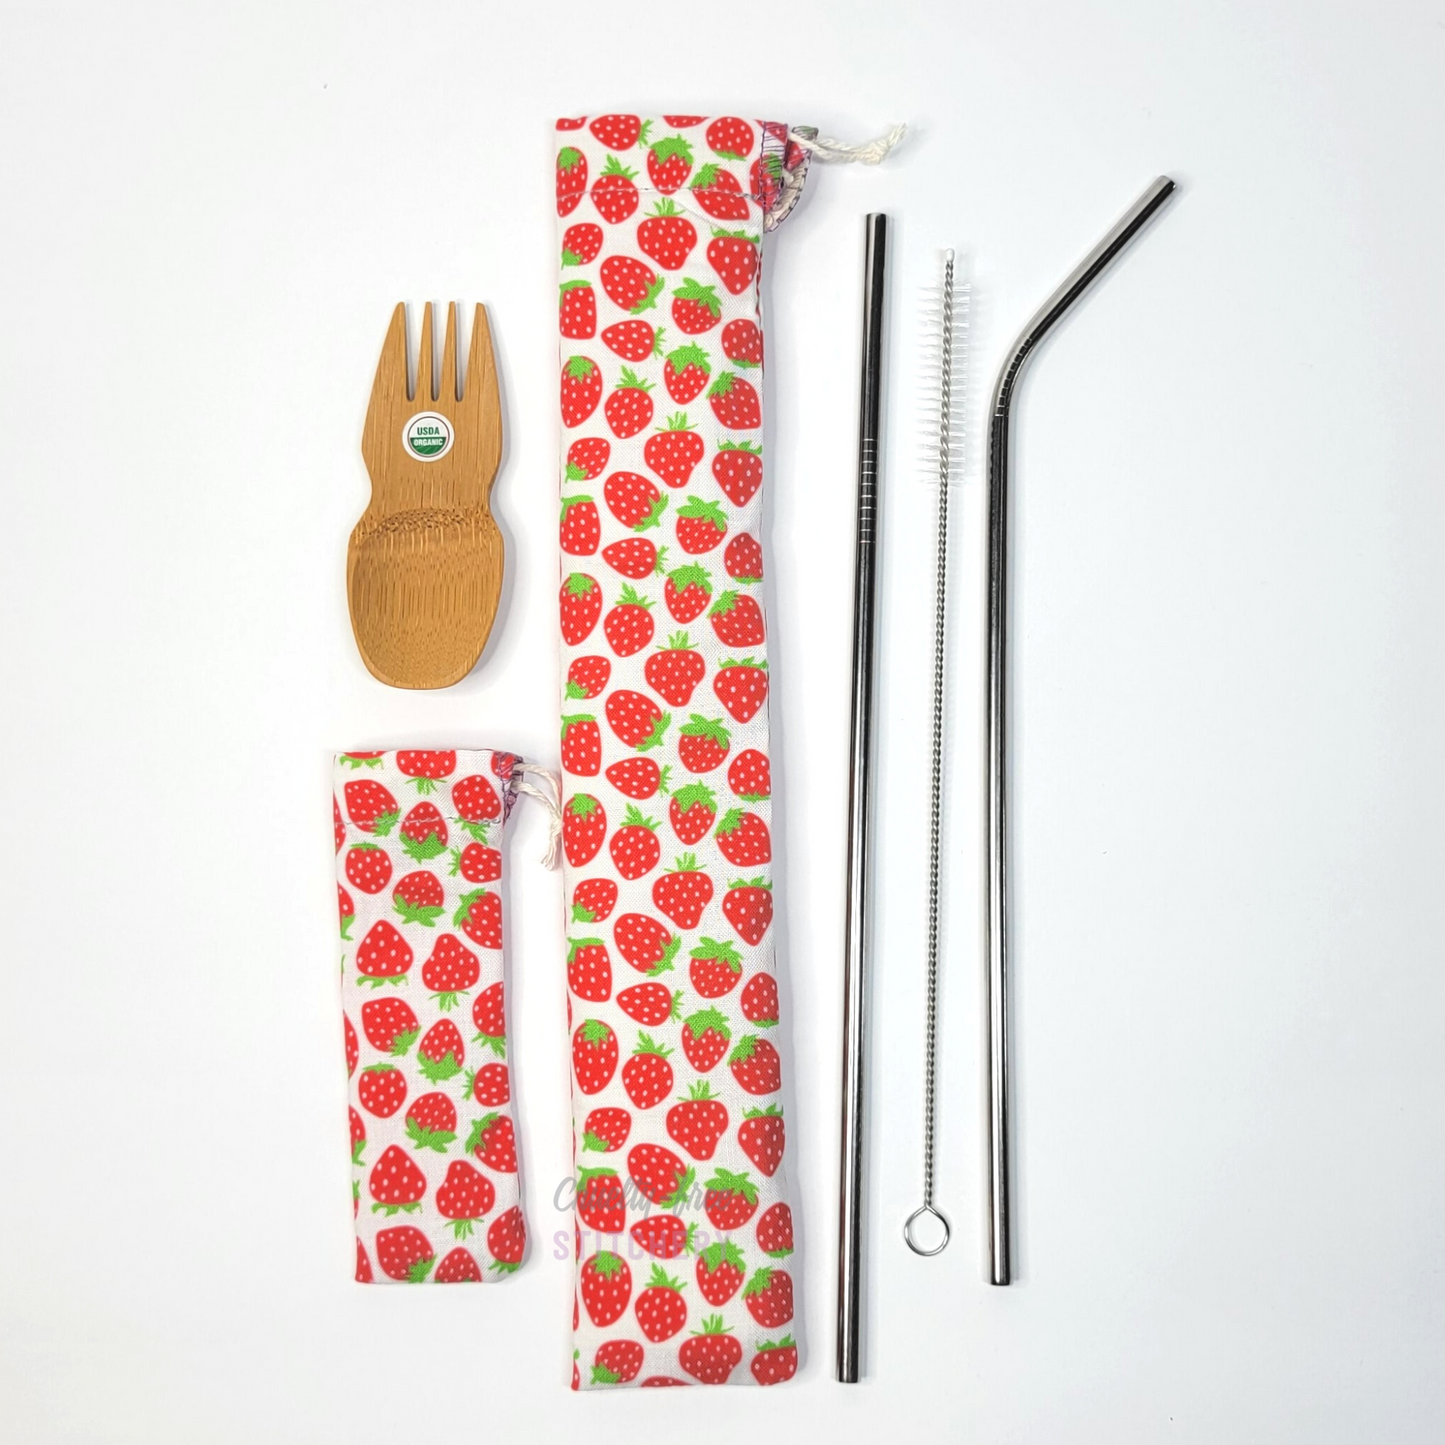 All contents of this set, a bamboo spork, strawberry spork pouch, matching strawberry straw pouch, and stainless steel straws.